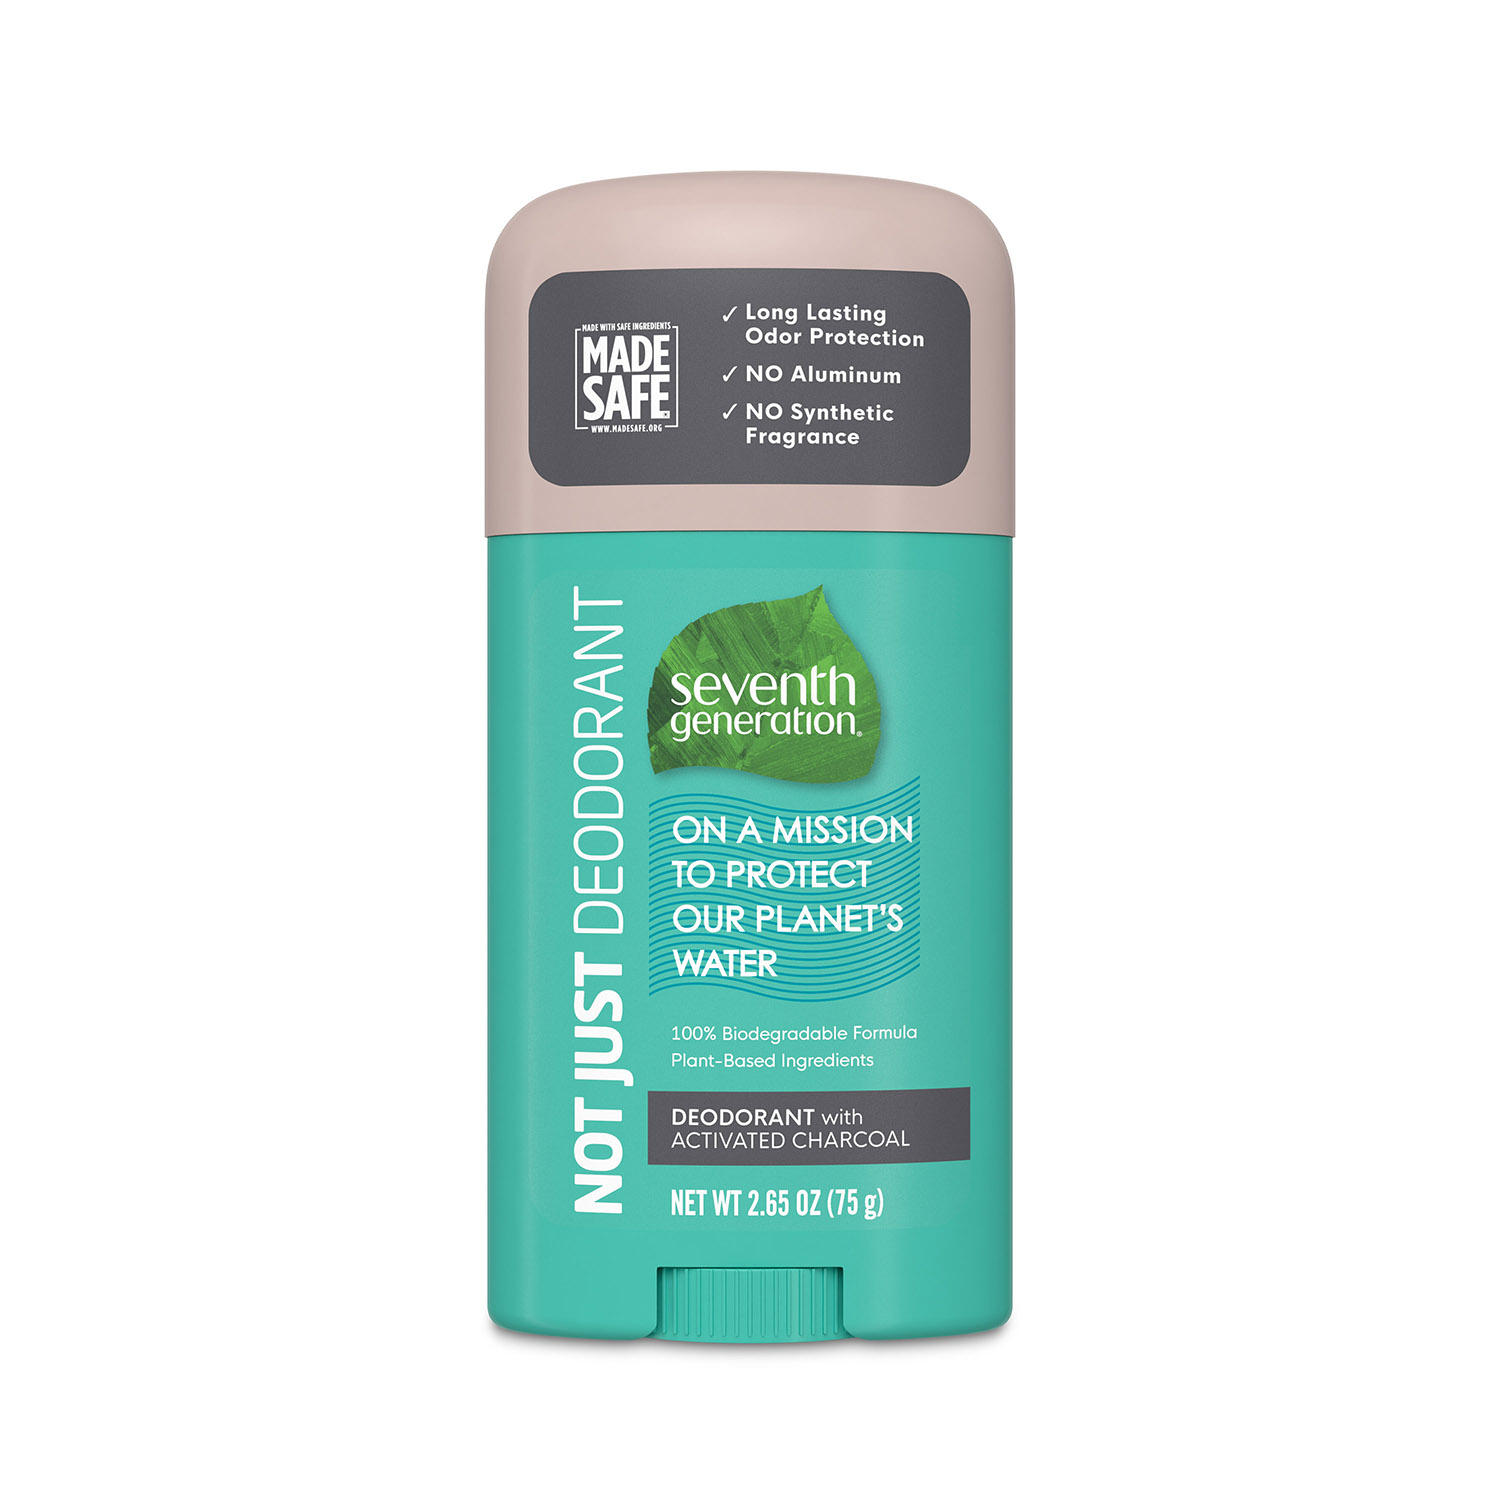 Seventh Generation Activated Charcoal Deodorant